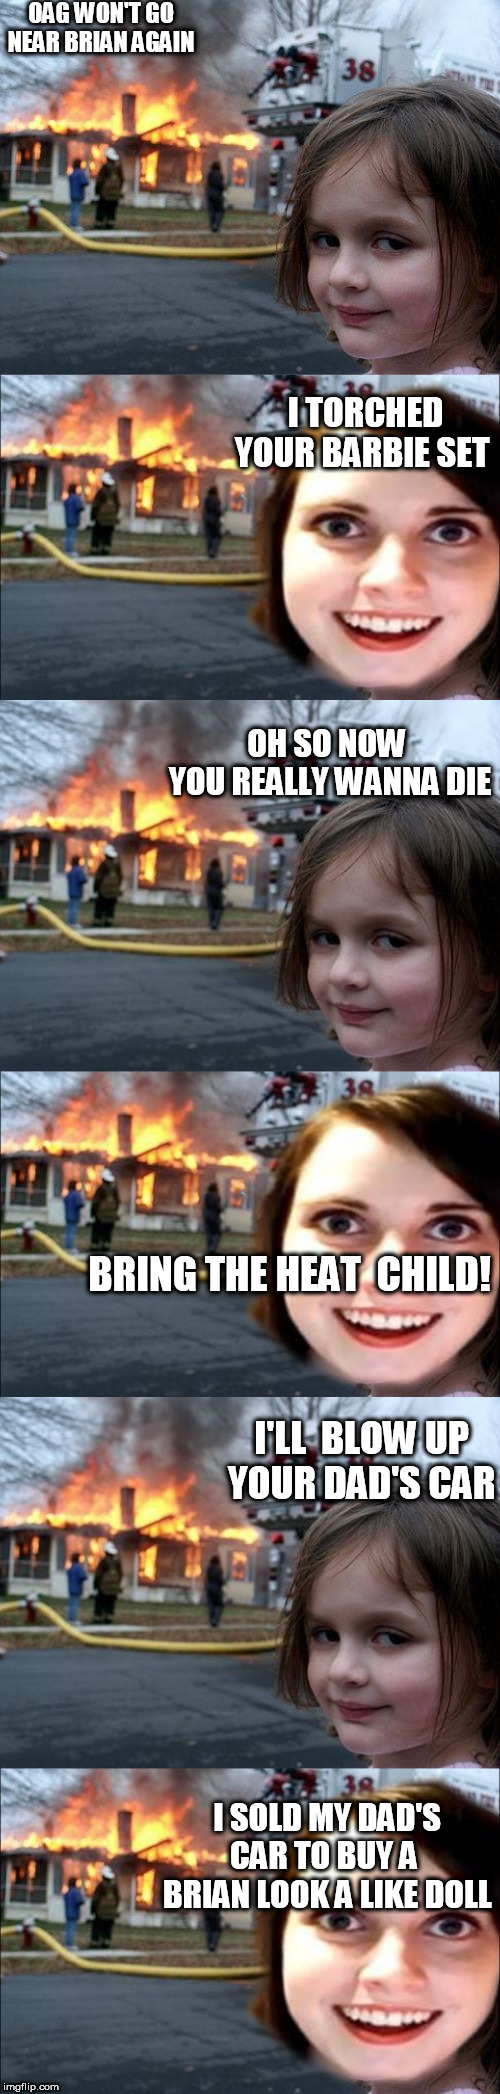 THE FIRE GIRL'SCould be a new series on fox! | OAG WON'T GO NEAR BRIAN AGAIN; I TORCHED YOUR BARBIE SET; OH SO NOW  YOU REALLY WANNA DIE; BRING THE HEAT  CHILD! I'LL  BLOW UP YOUR DAD'S CAR; I SOLD MY DAD'S CAR TO BUY A  BRIAN LOOK A LIKE DOLL | image tagged in memes,disaster girl,oag,pyro,lit,fire | made w/ Imgflip meme maker